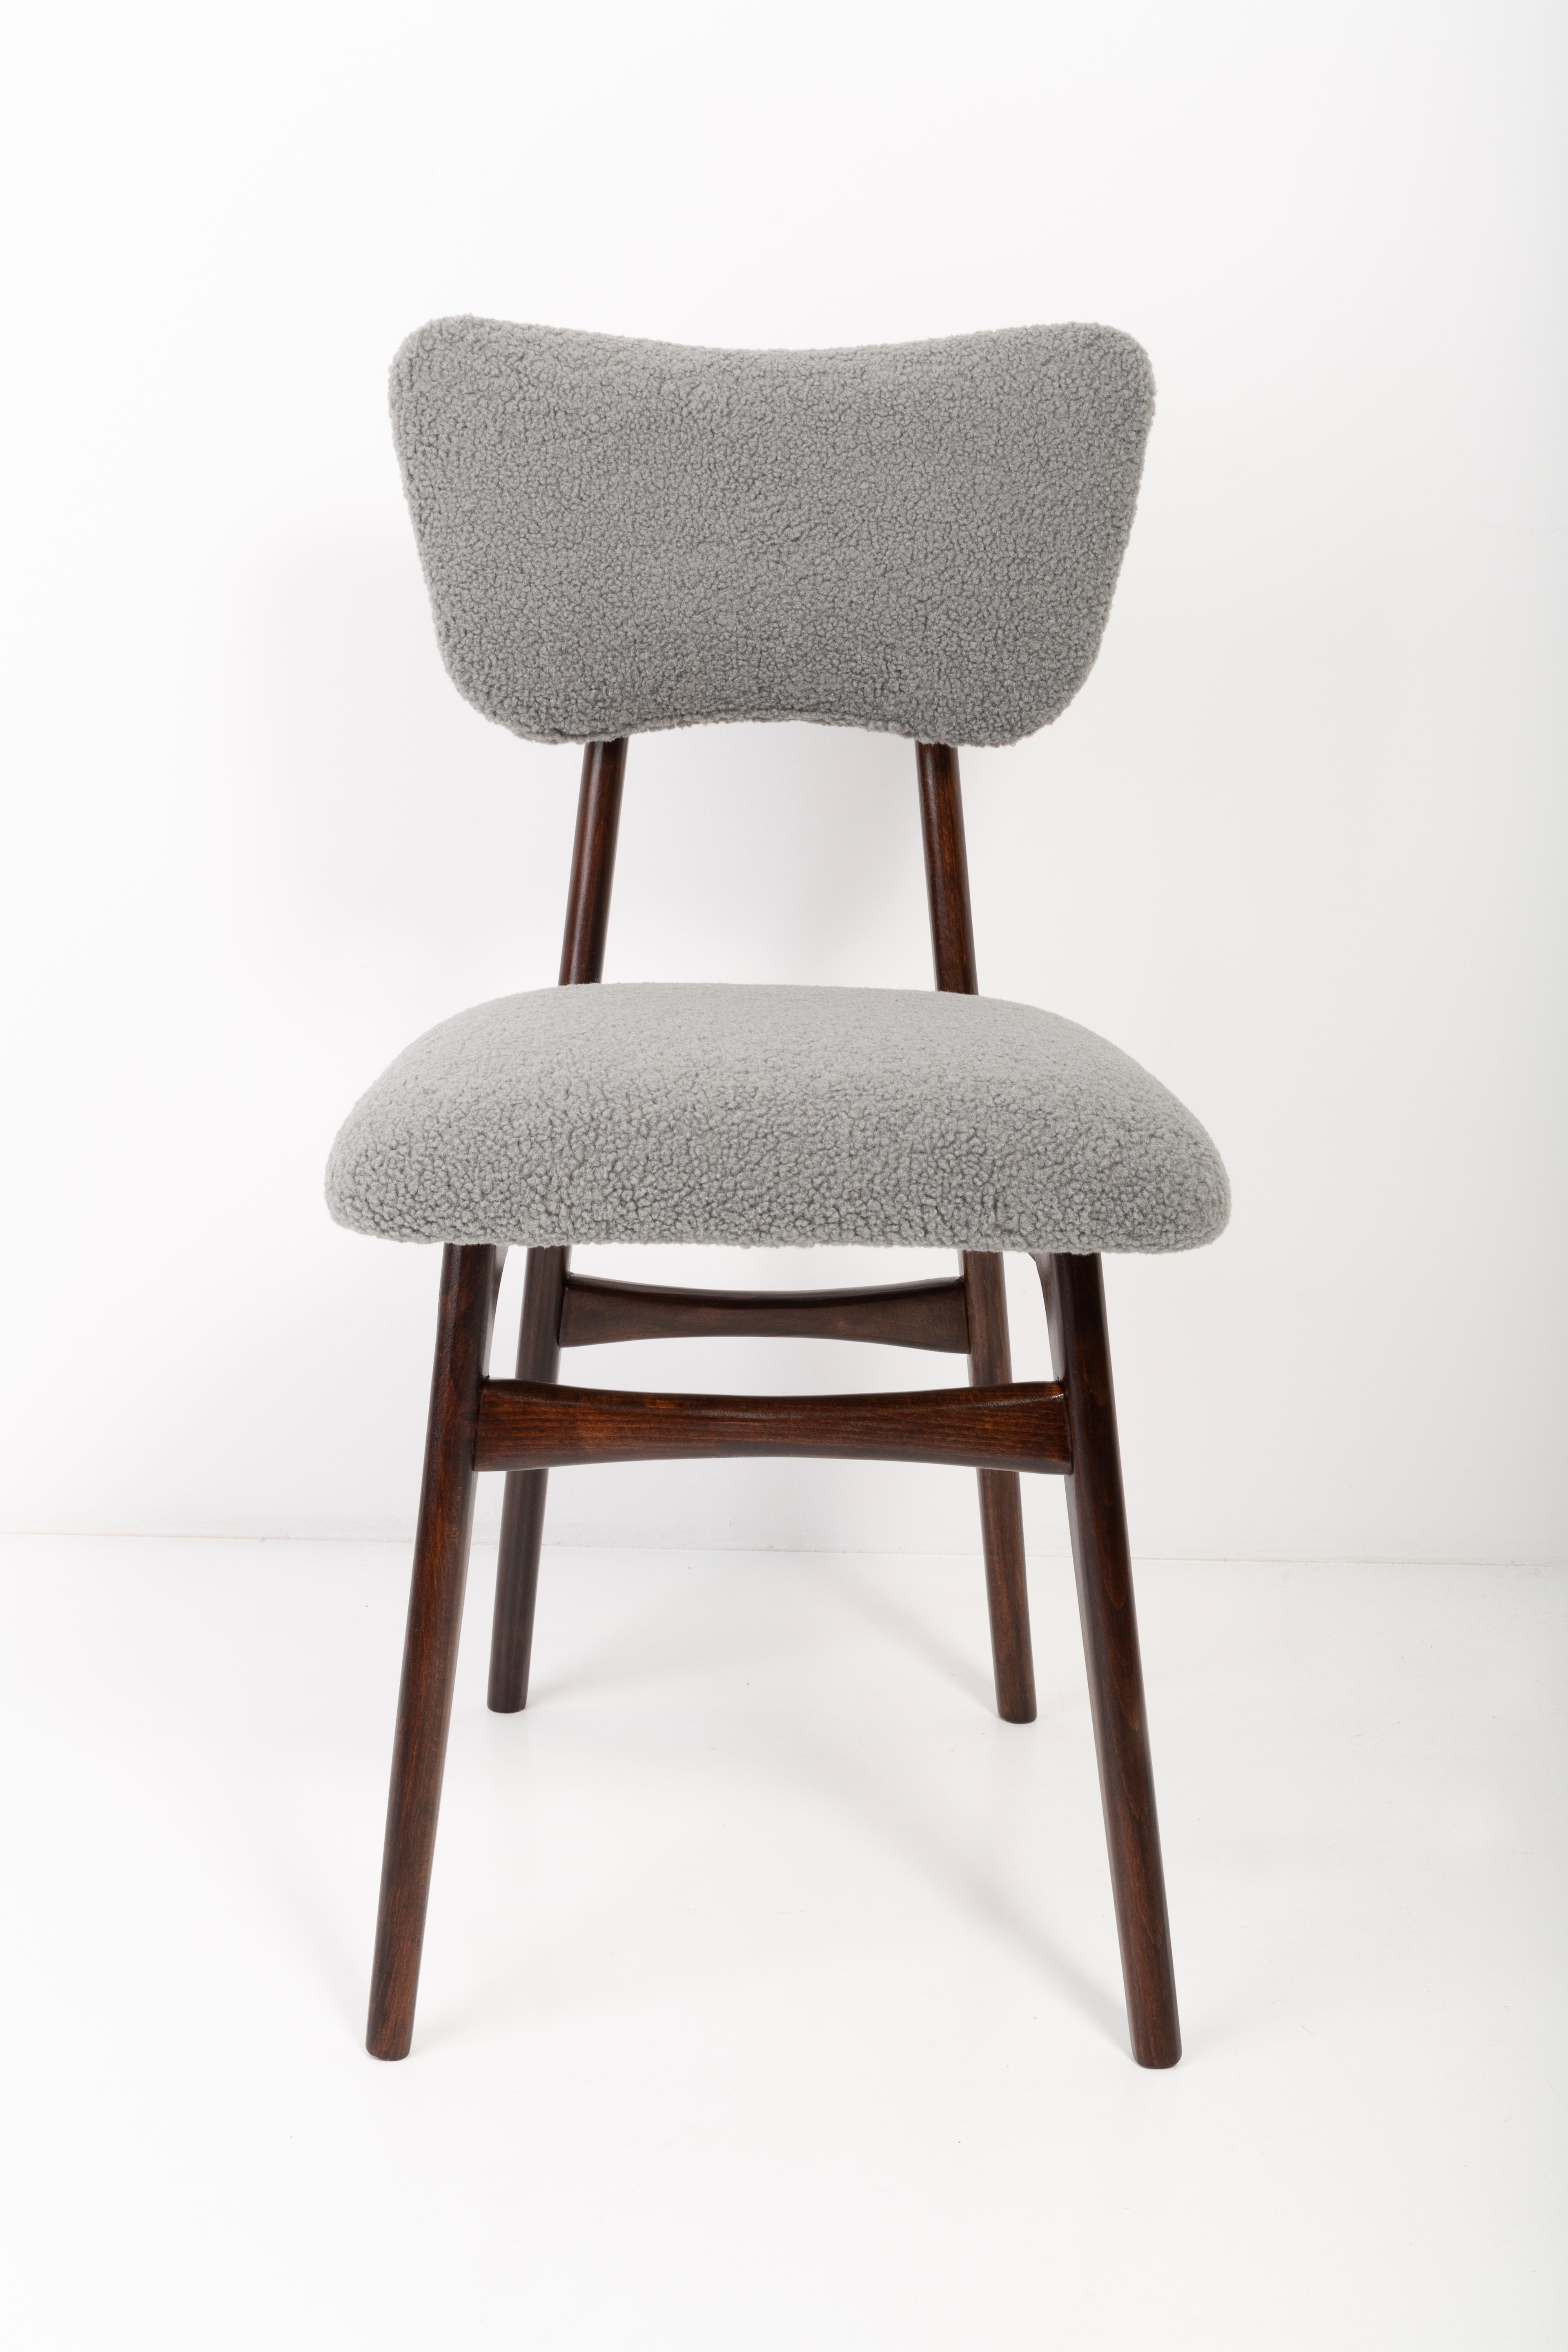 Set of Eight 20th Century Gray Boucle Chairs, 1960s For Sale 7